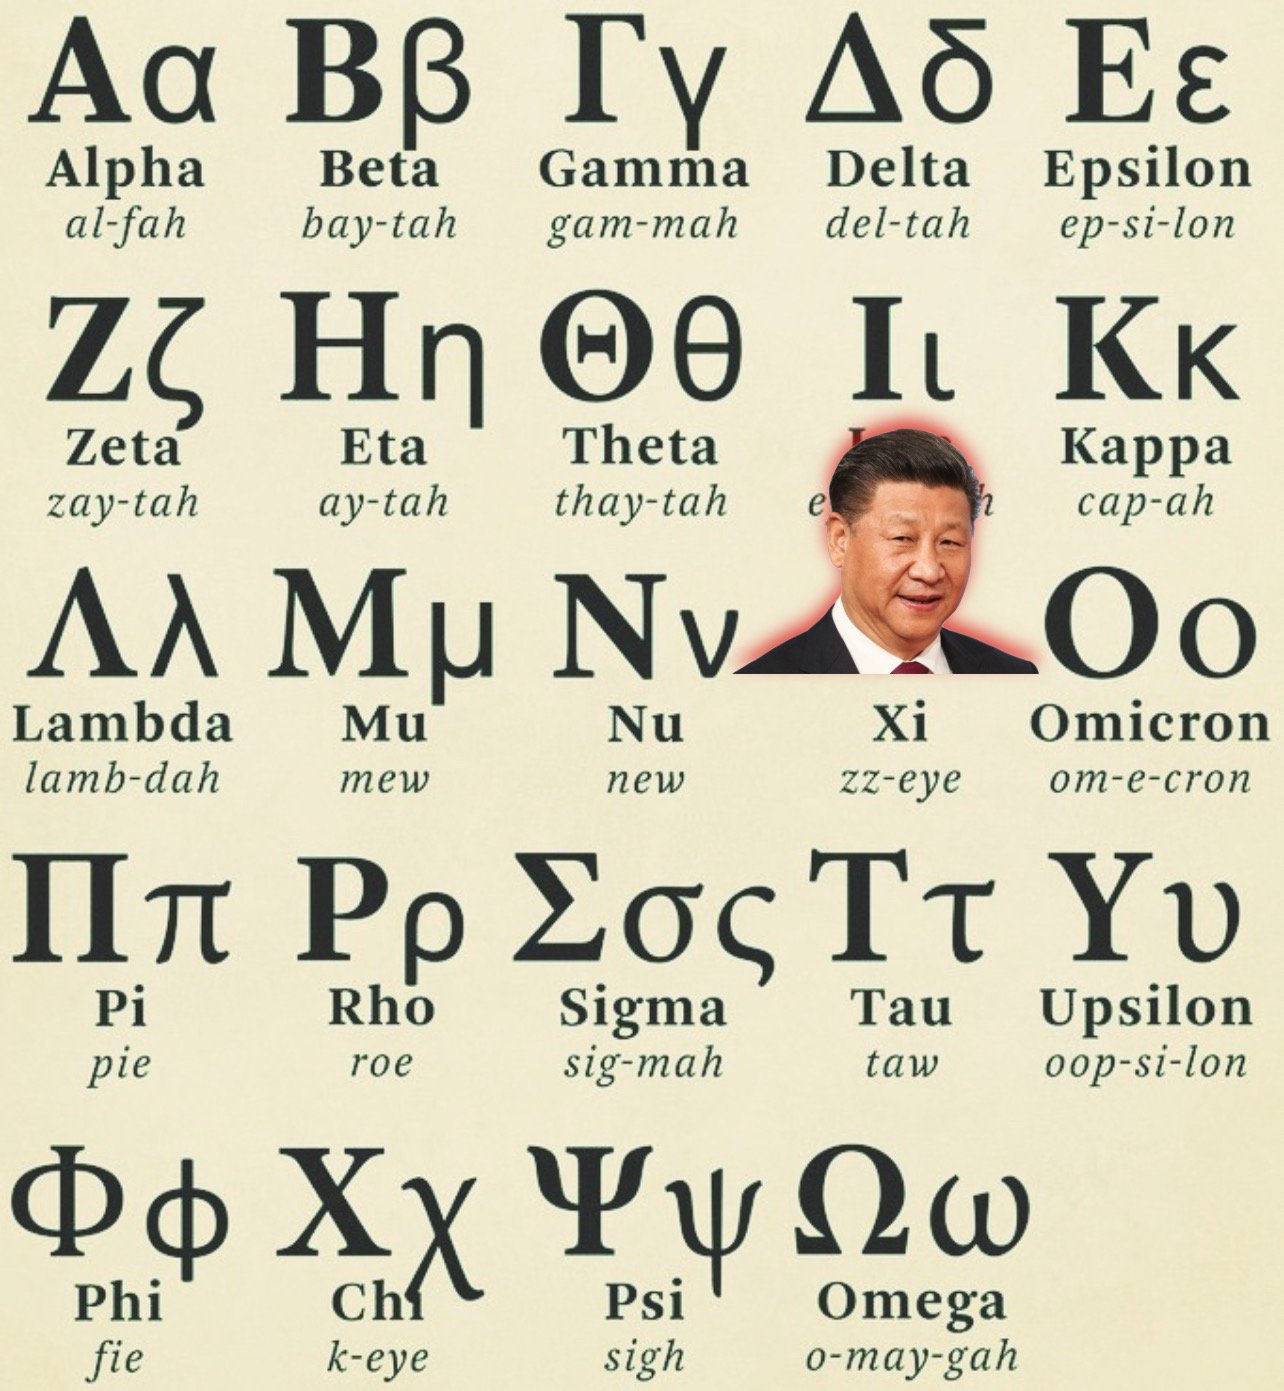  WHO Skips Next Greek Letter After “Nu” in Naming New COVID Variant – The Next Letter “Xi” Might Draw Attention to China – So They Named it “Omicron” Instead